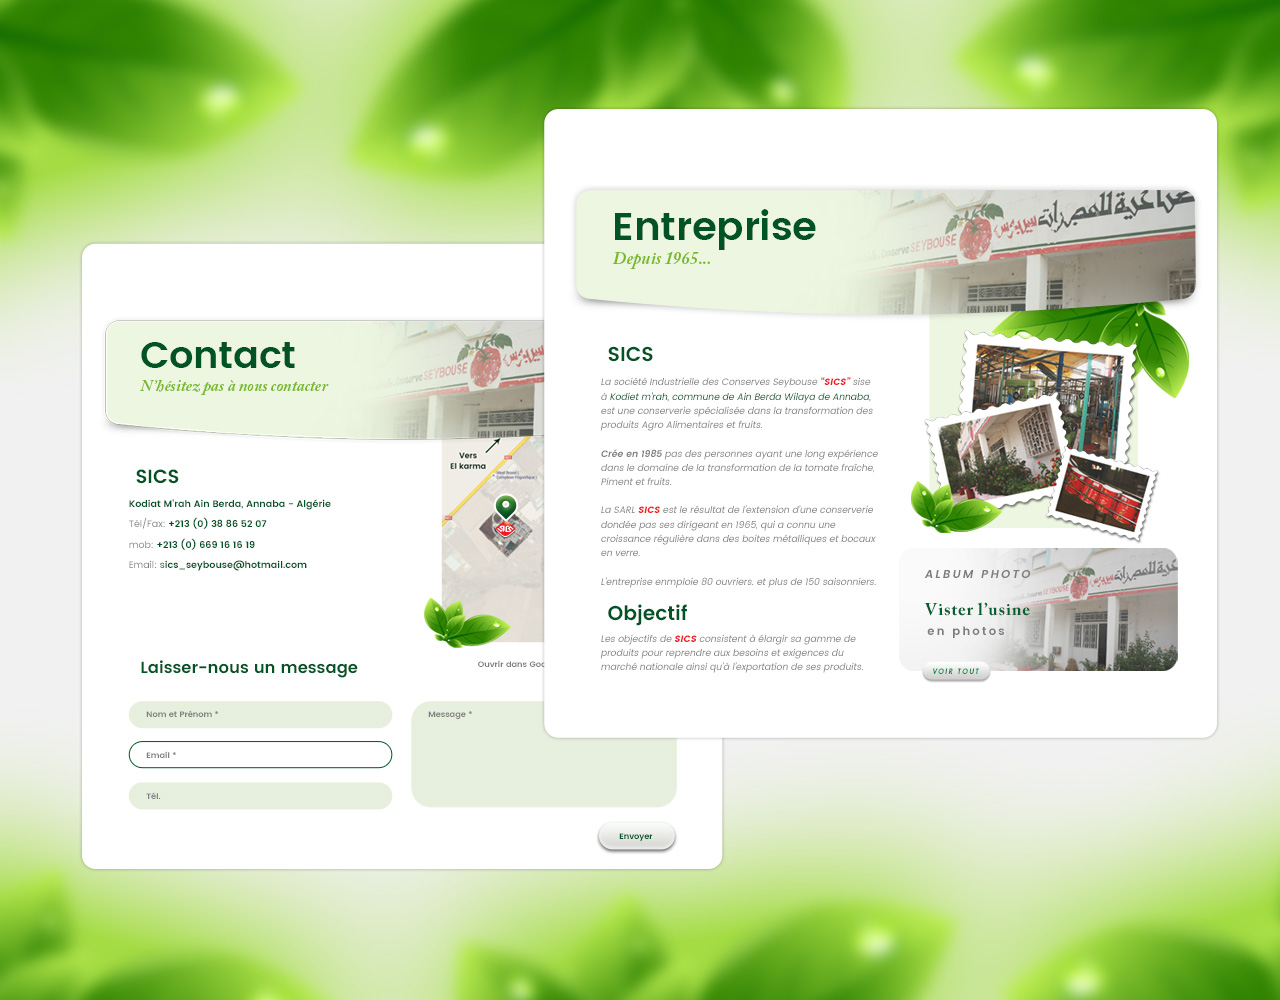 Contact and entreprise